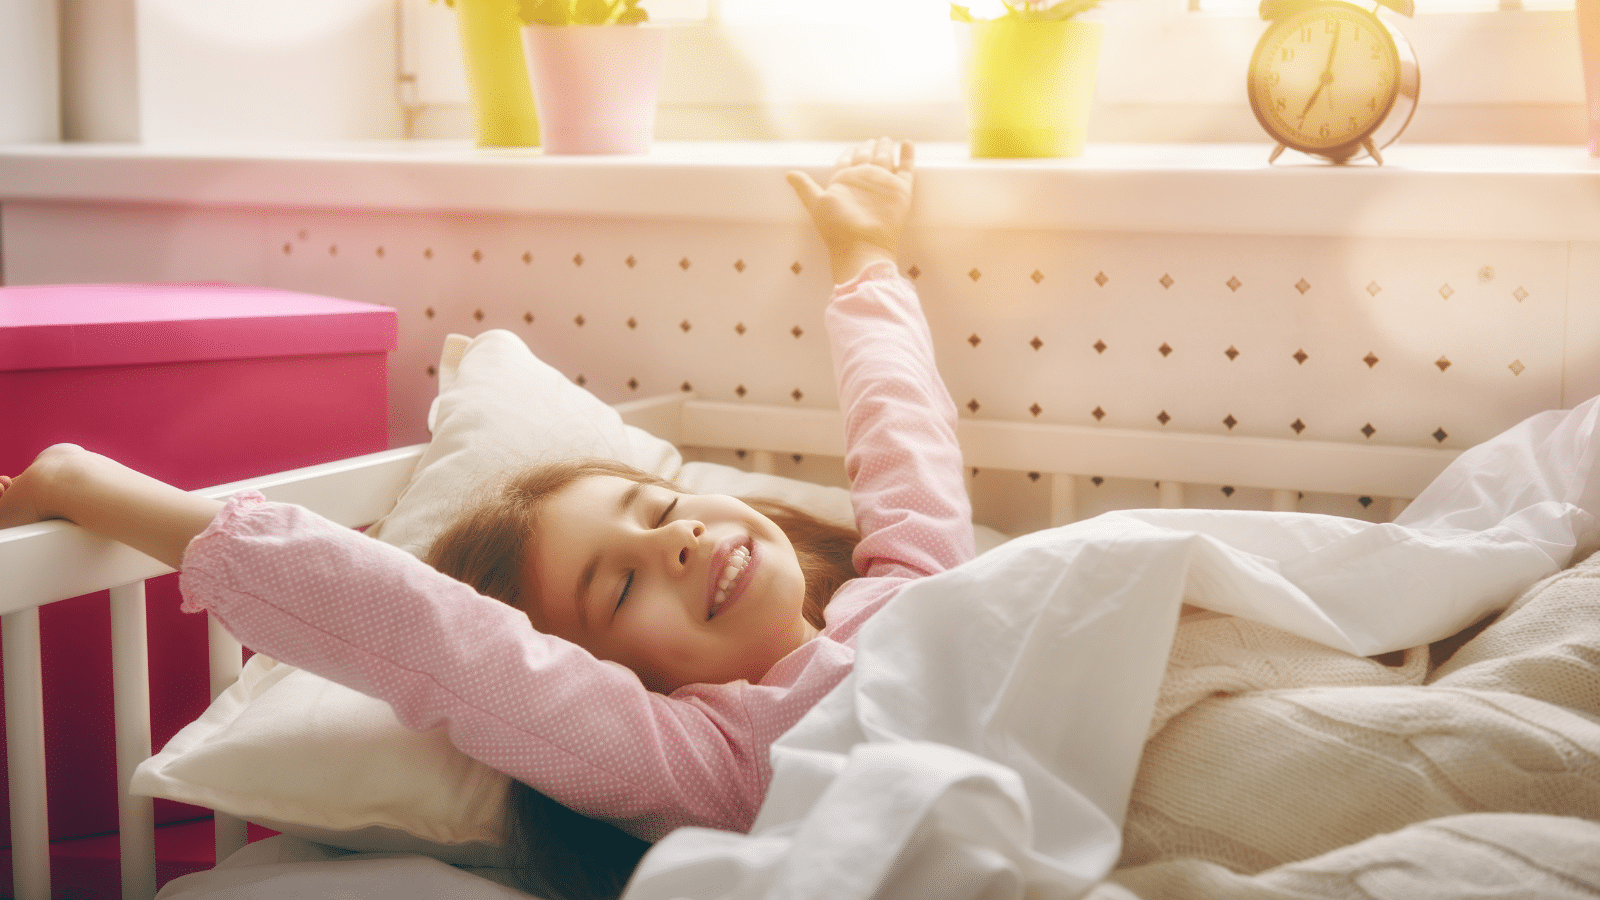 Little girl stretching in her bed as she wakes up to the sun shining on her.